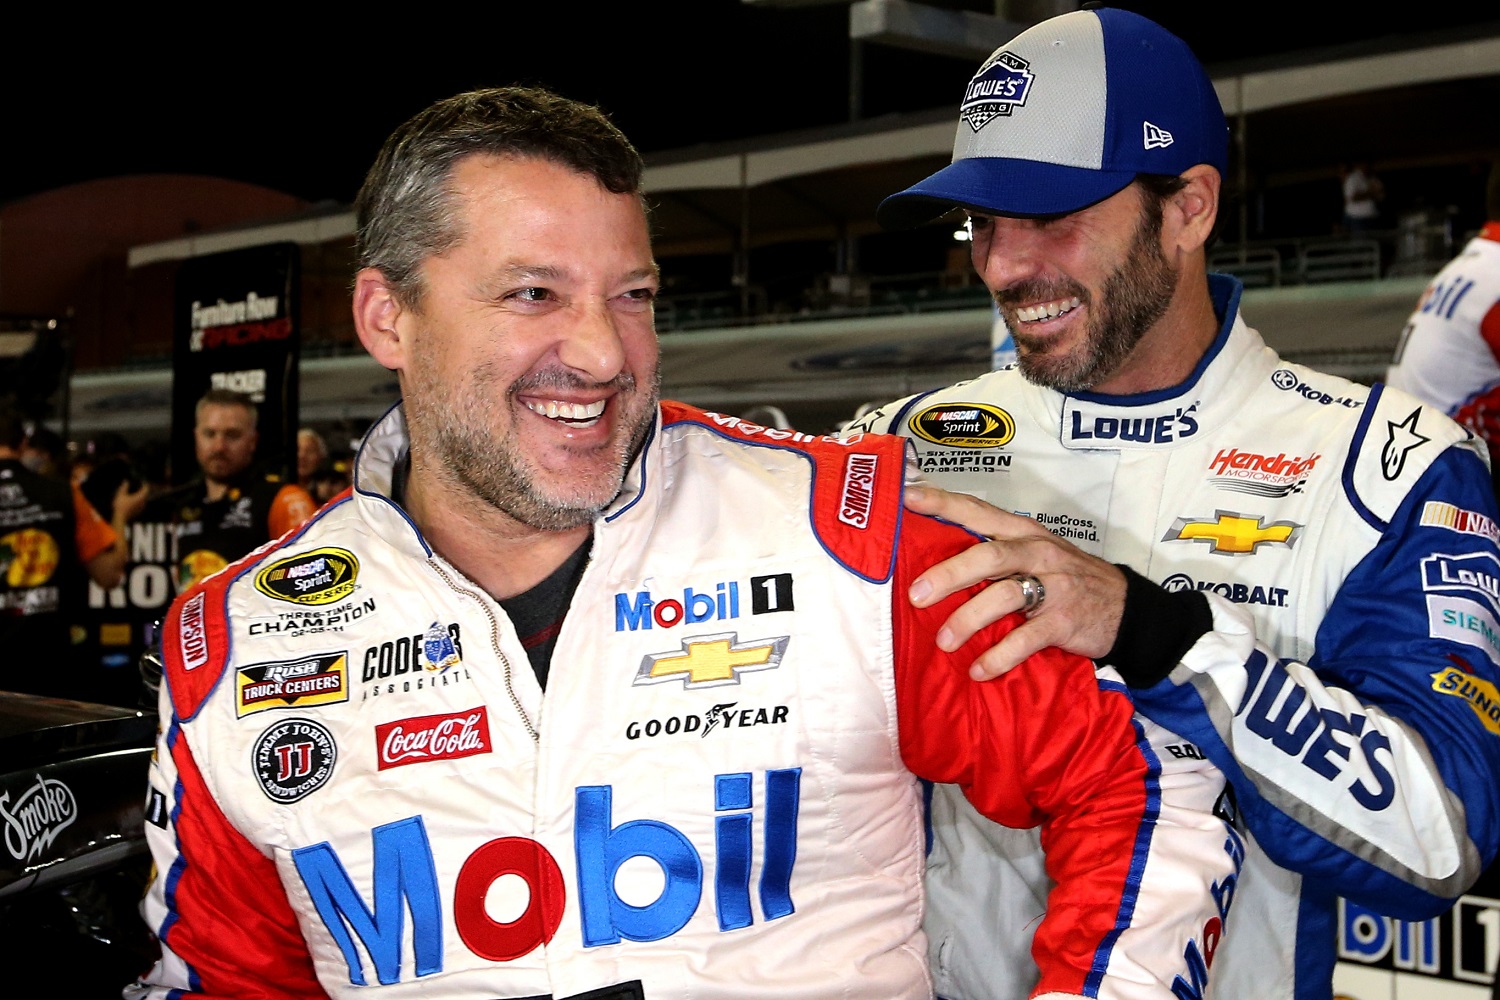 Tony Stewart and Jimmie Johnson joke around on the grid during qualifying for the NASCAR Sprint Cup Series Ford EcoBoost 400 at Homestead-Miami Speedway on Nov. 18, 2016.